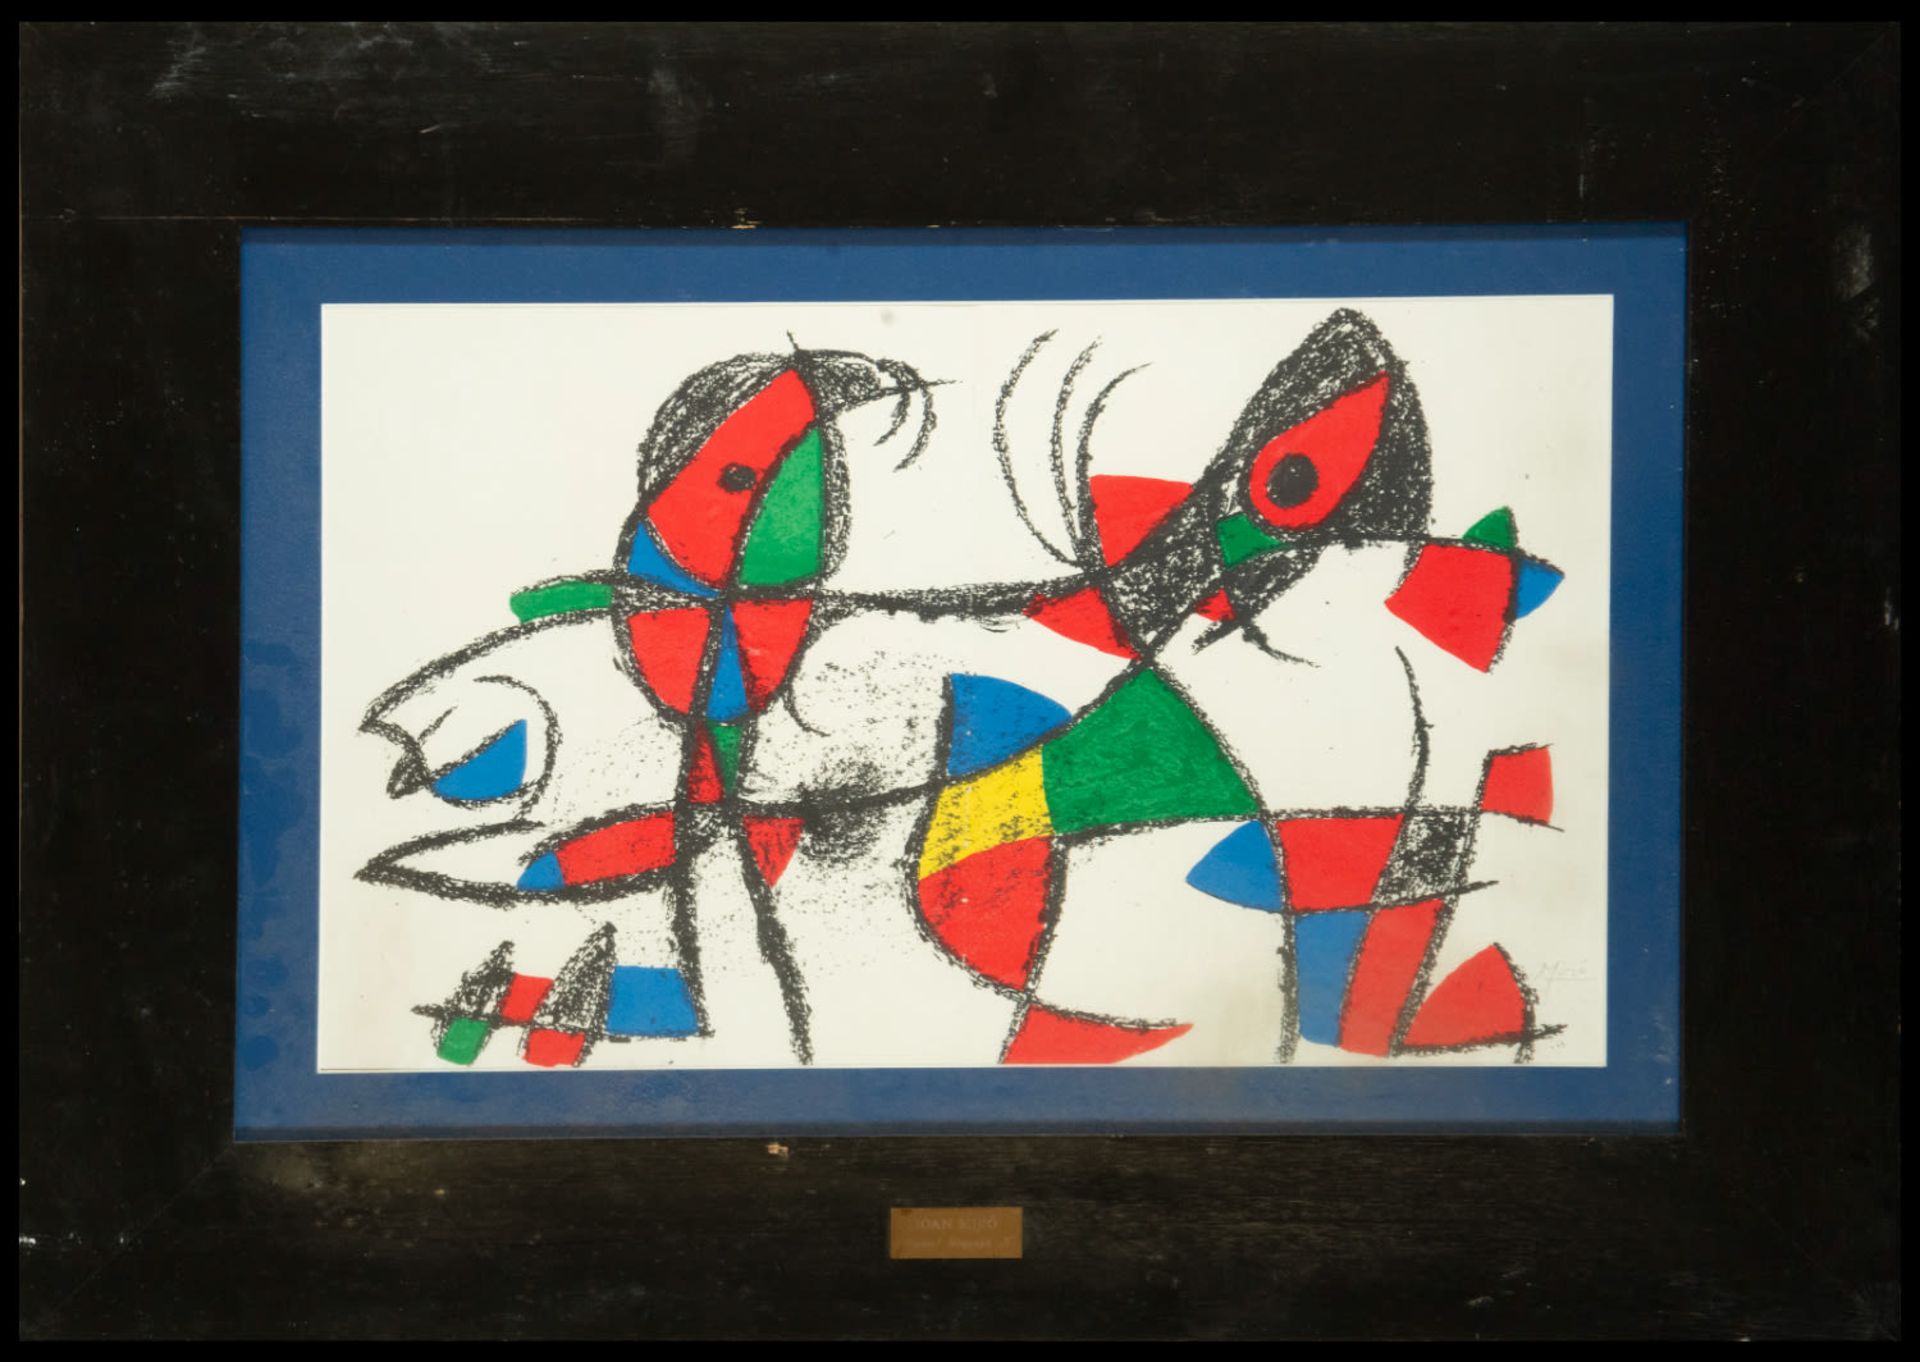 Lithograph X, Joan Miró (1893-1983), Catalan cubist school of the 20th century